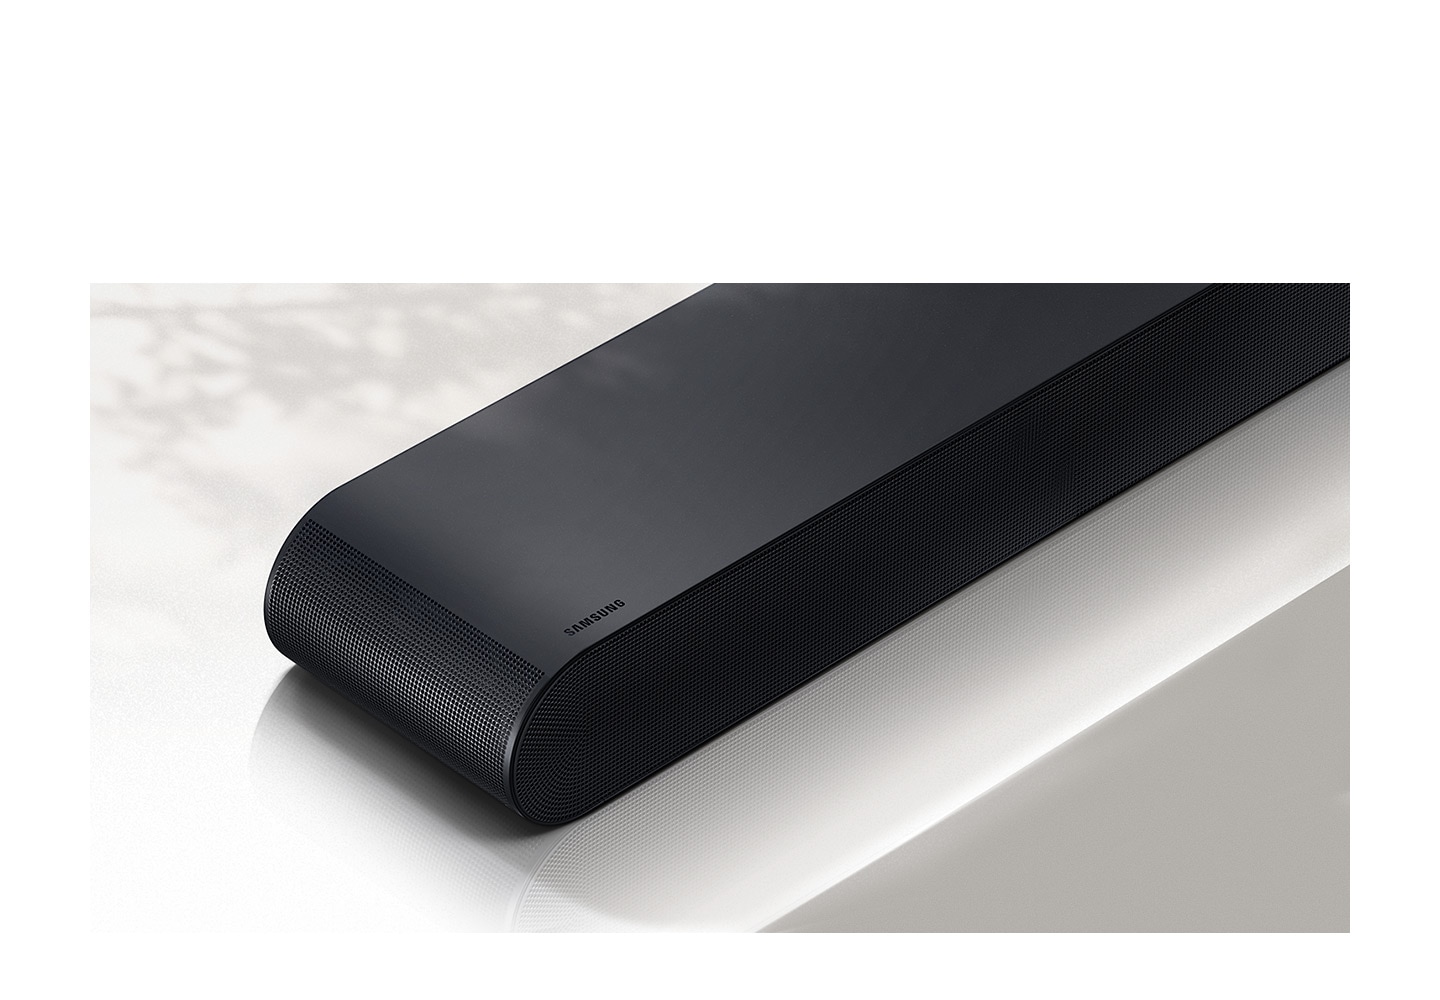 Closeup view of S60B soundbar which is shown in front with Samsung logo visible.